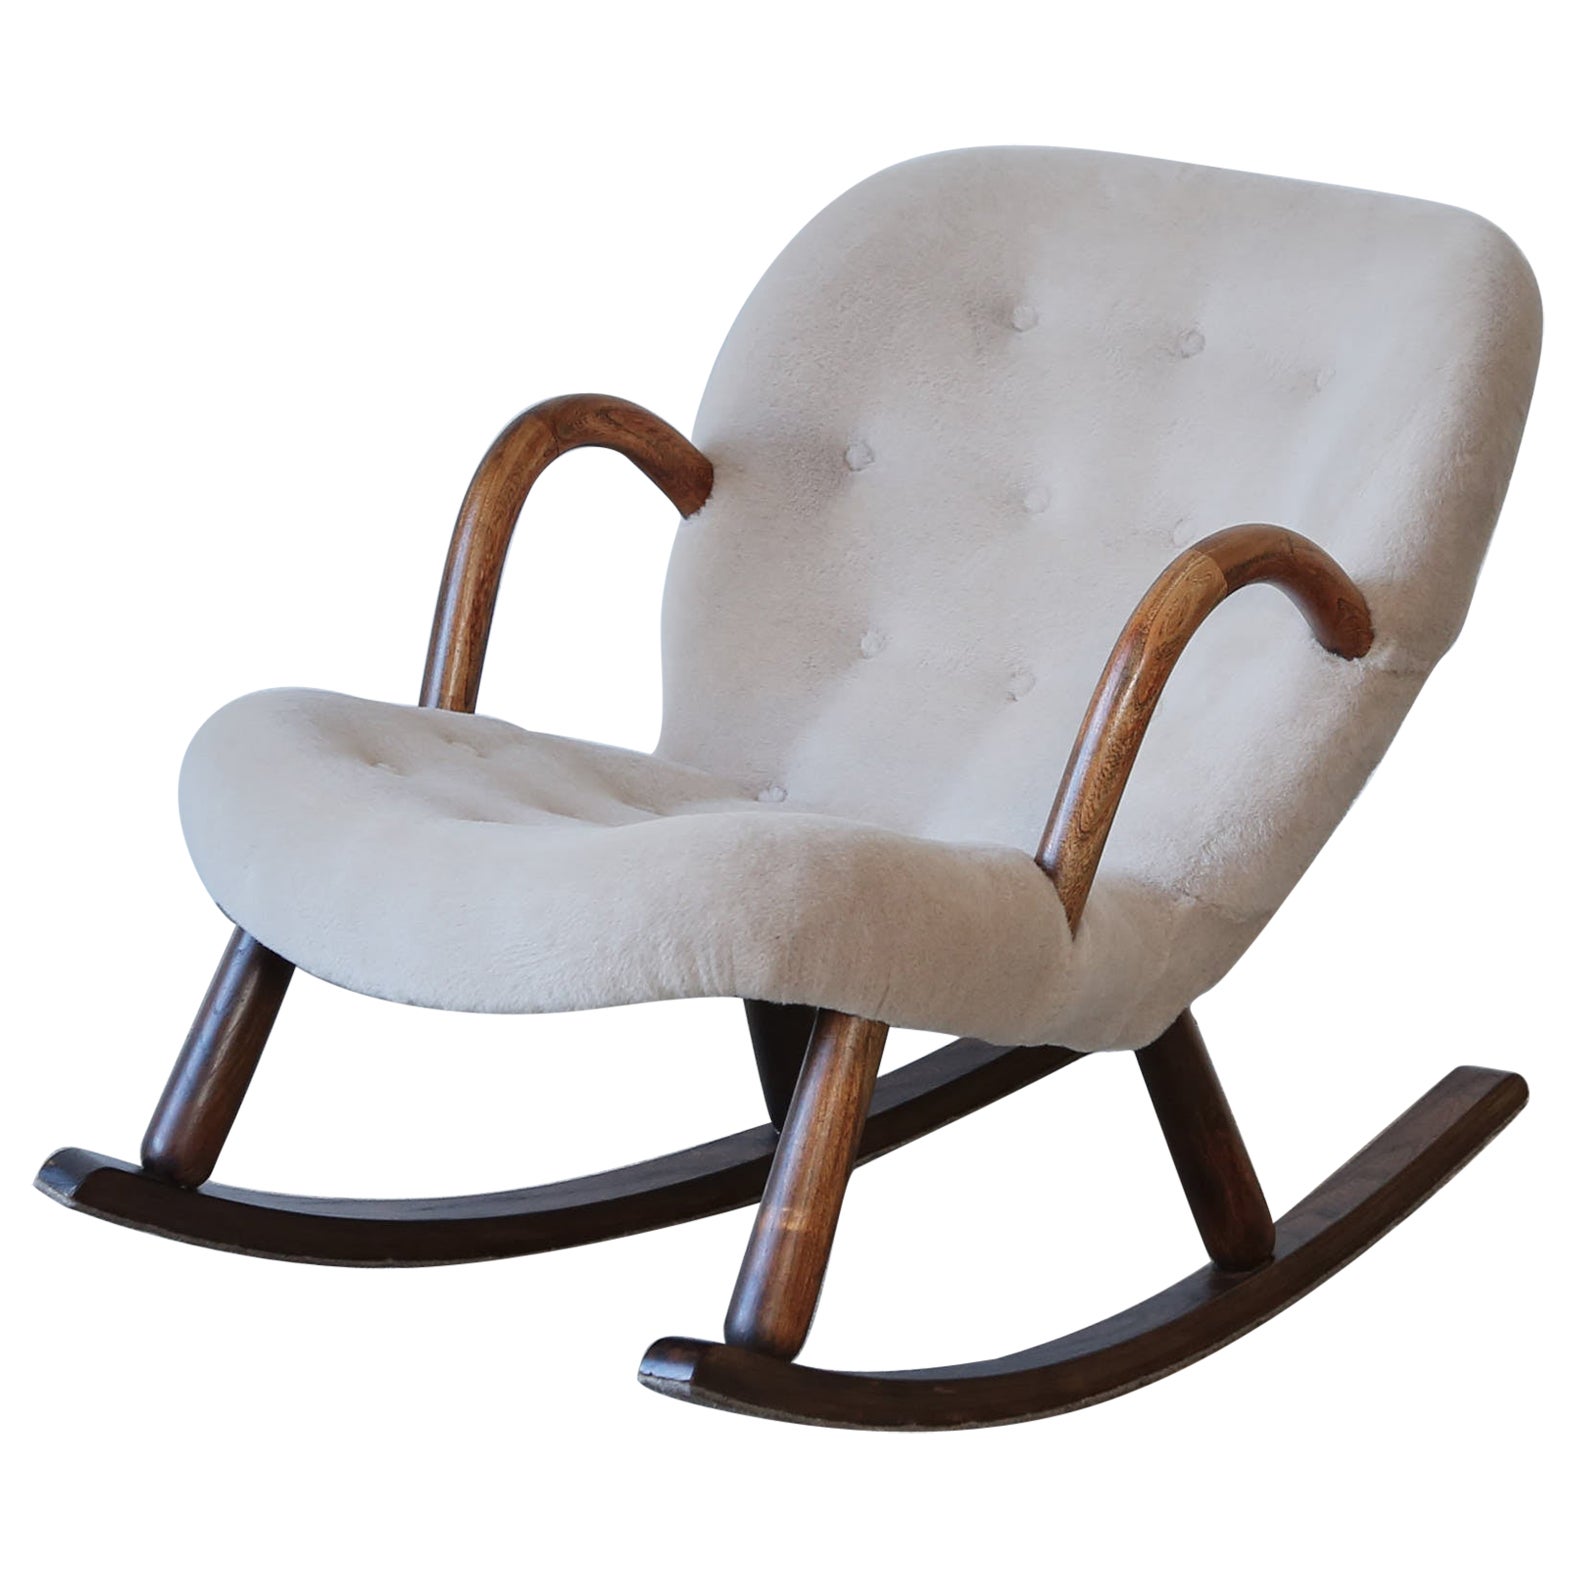 Rare Arnold Madsen Clam Rocking Chair, Newly Upholstered in Alpaca, 1950s For Sale